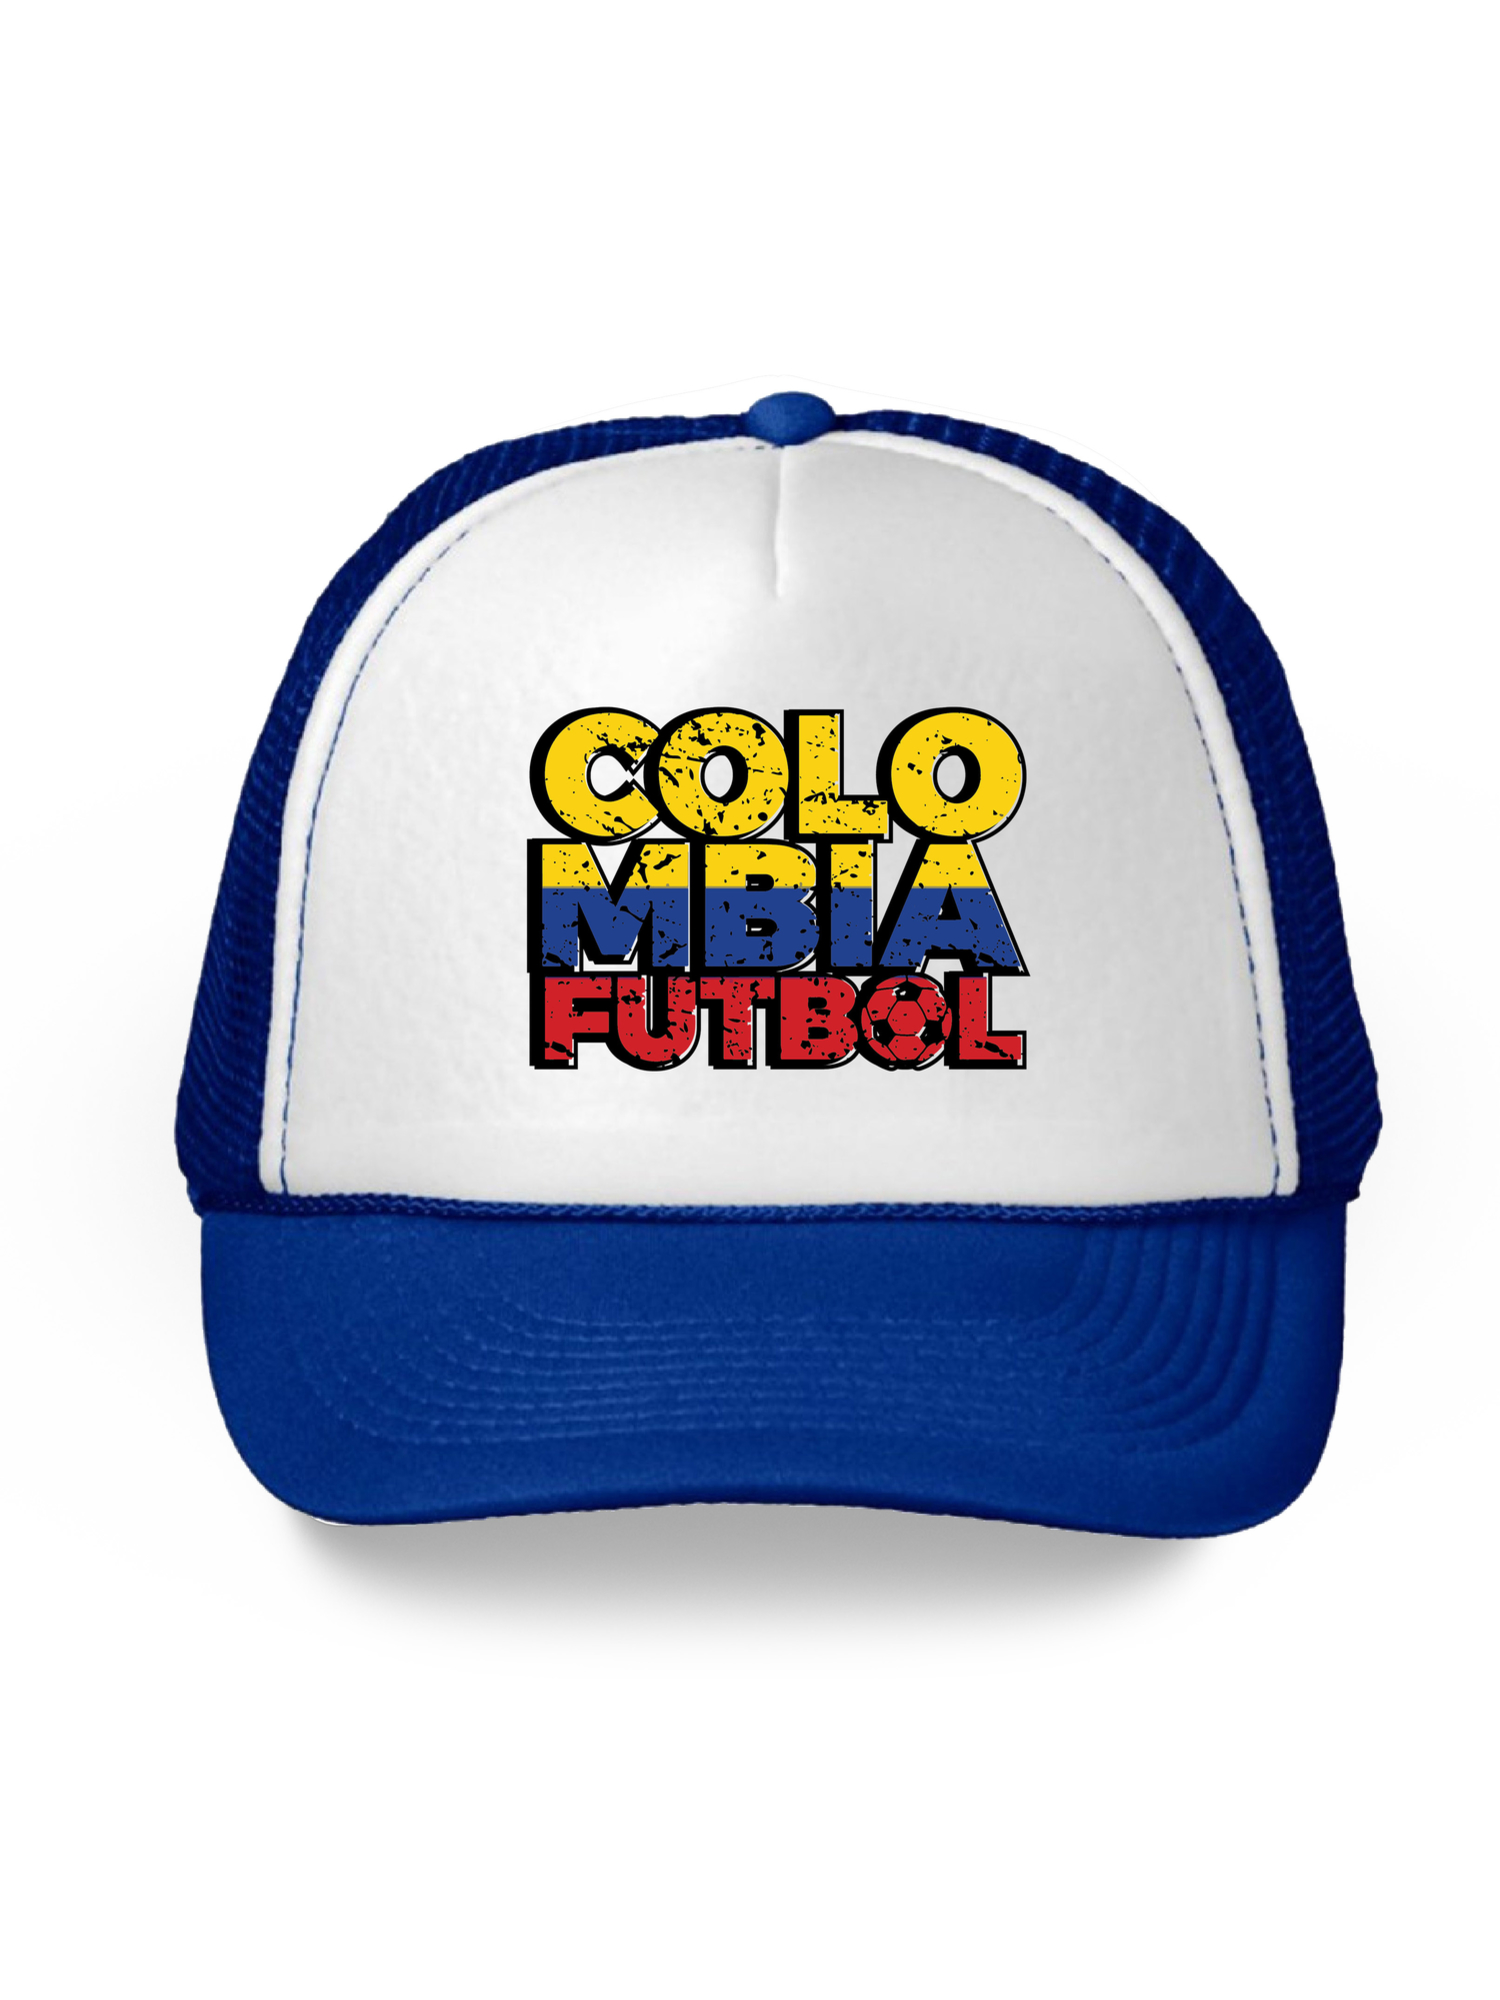 Awkward Styles Colombia Futbol Hat Colombia Trucker Hats for Men and Women Hat Gifts from Colombia Colombian Soccer Cap Colombian Hats Unisex Colombia Snapback Hat Colombia 2018 Trucker Hats - image 1 of 6